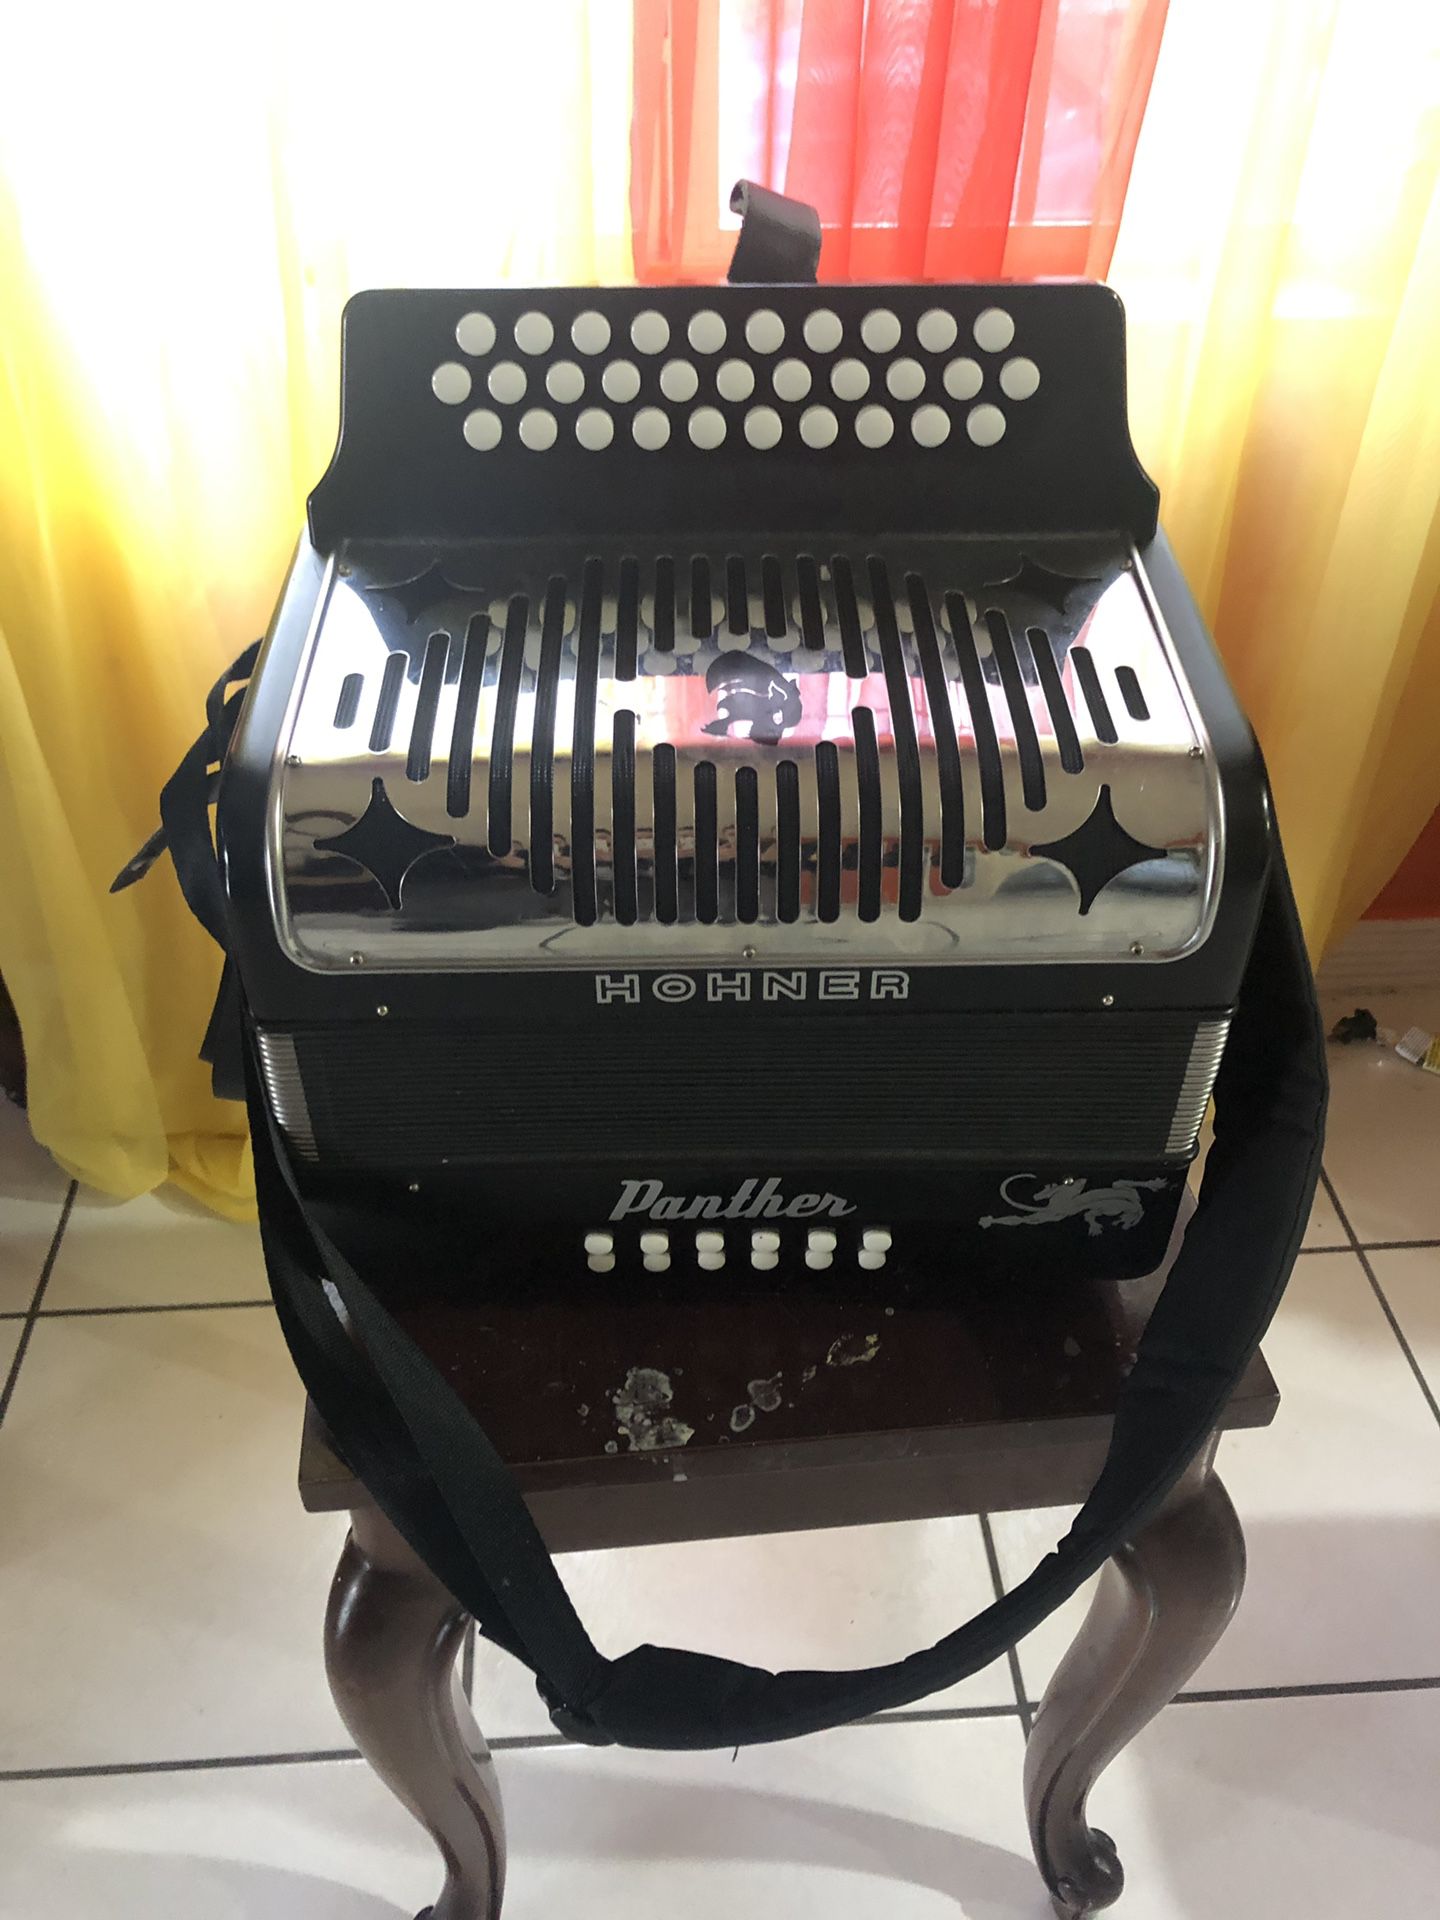 Hohner panther acordeon for Sale in Huntington Park, CA - OfferUp